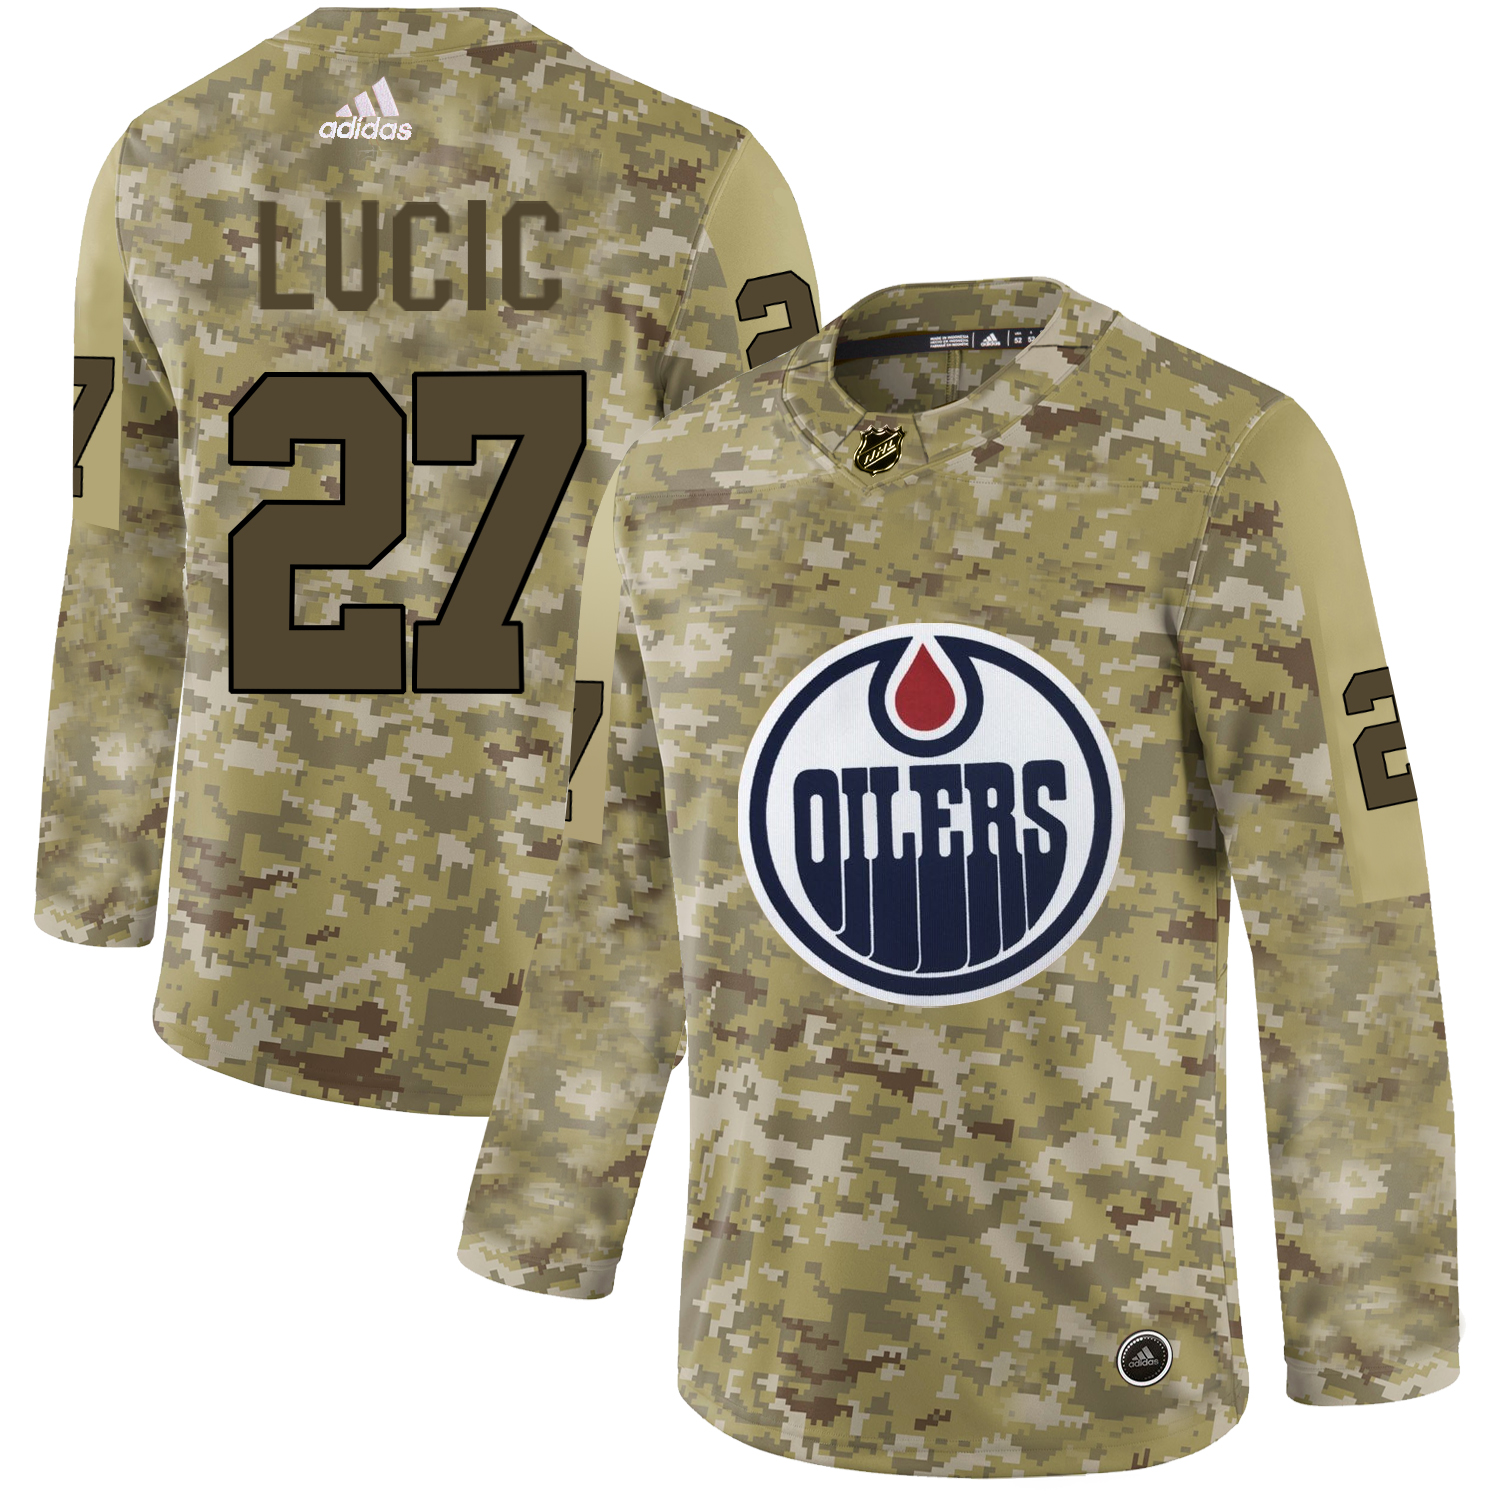 Adidas Oilers #27 Milan Lucic Camo Authentic Stitched NHL Jersey